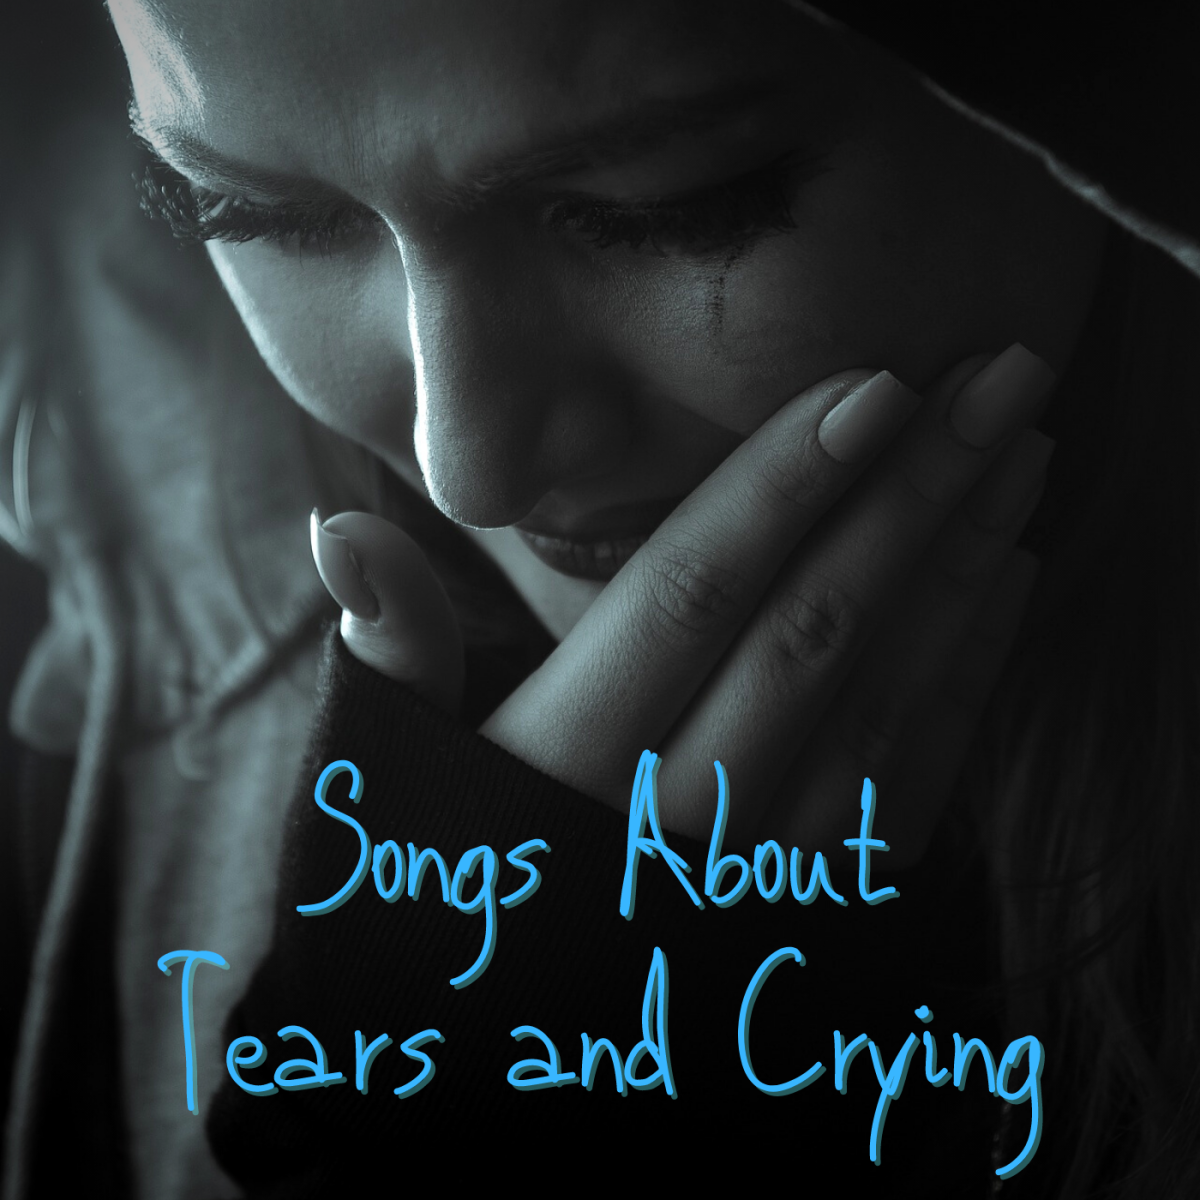 88 Songs About Crying and Tears